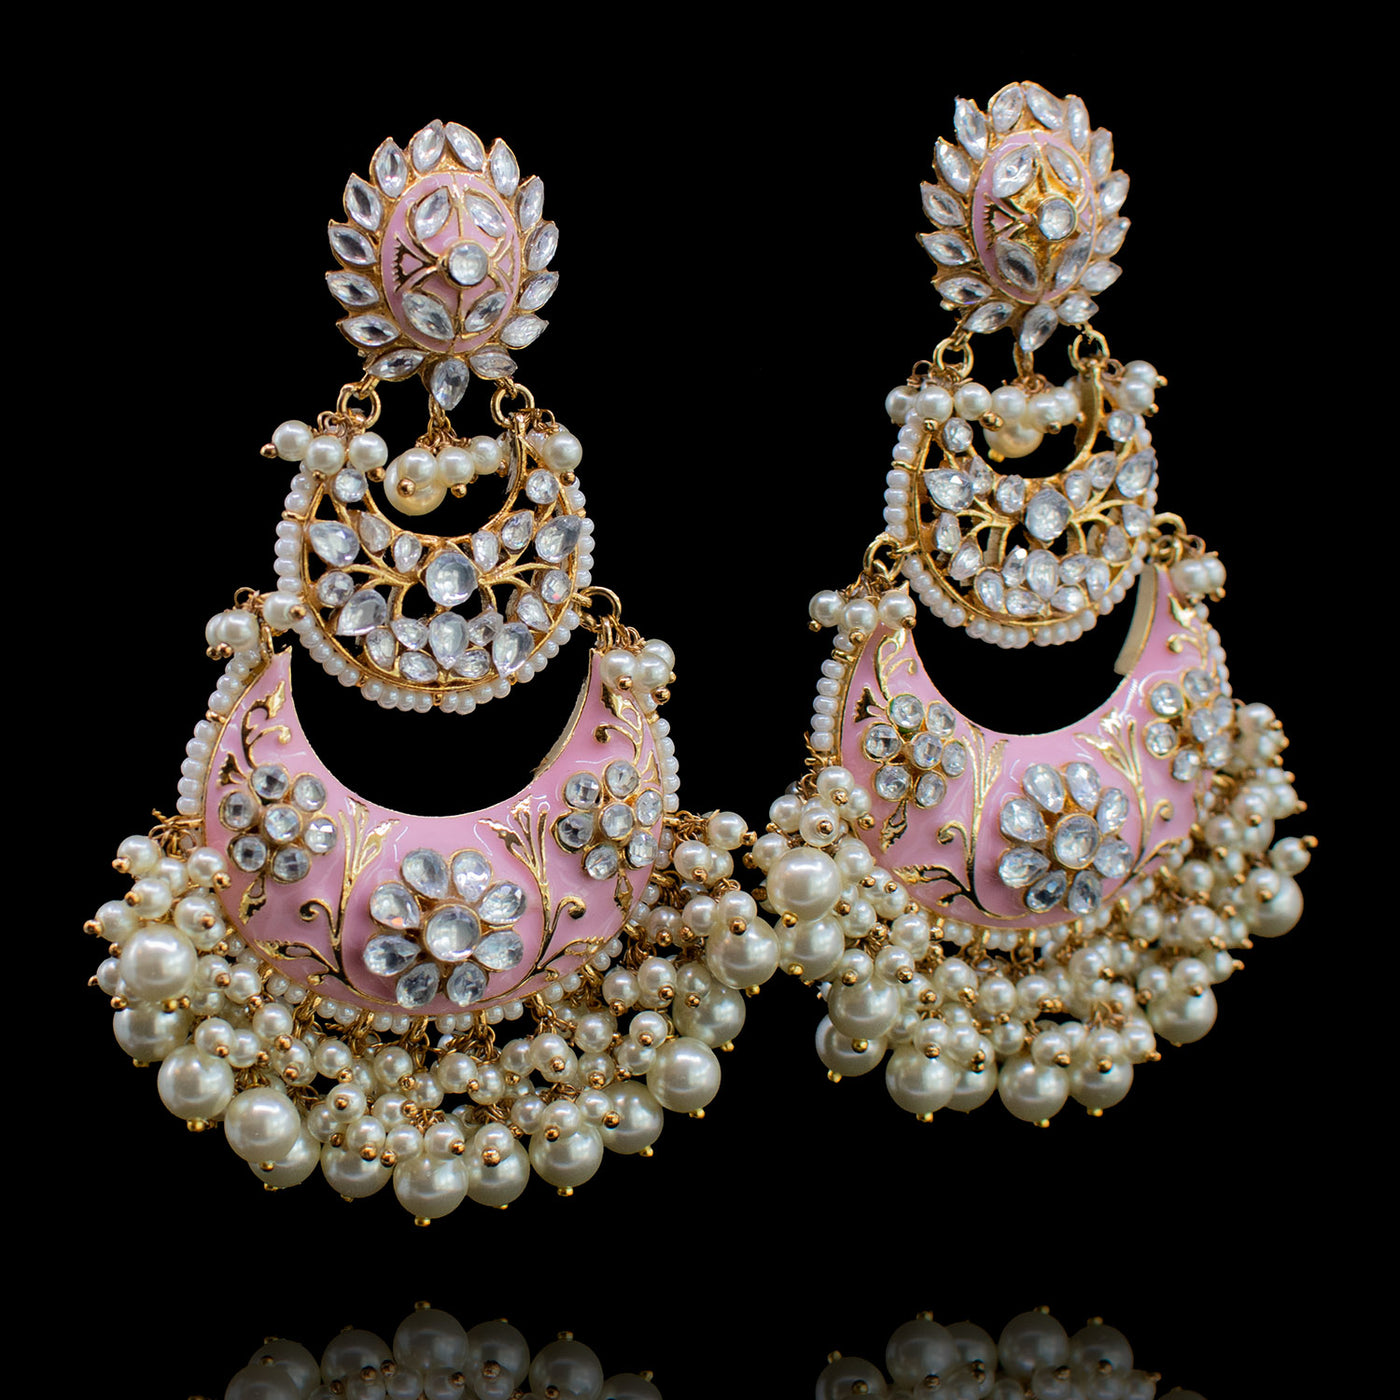 Imroz Earrings - Available in 3 Colors